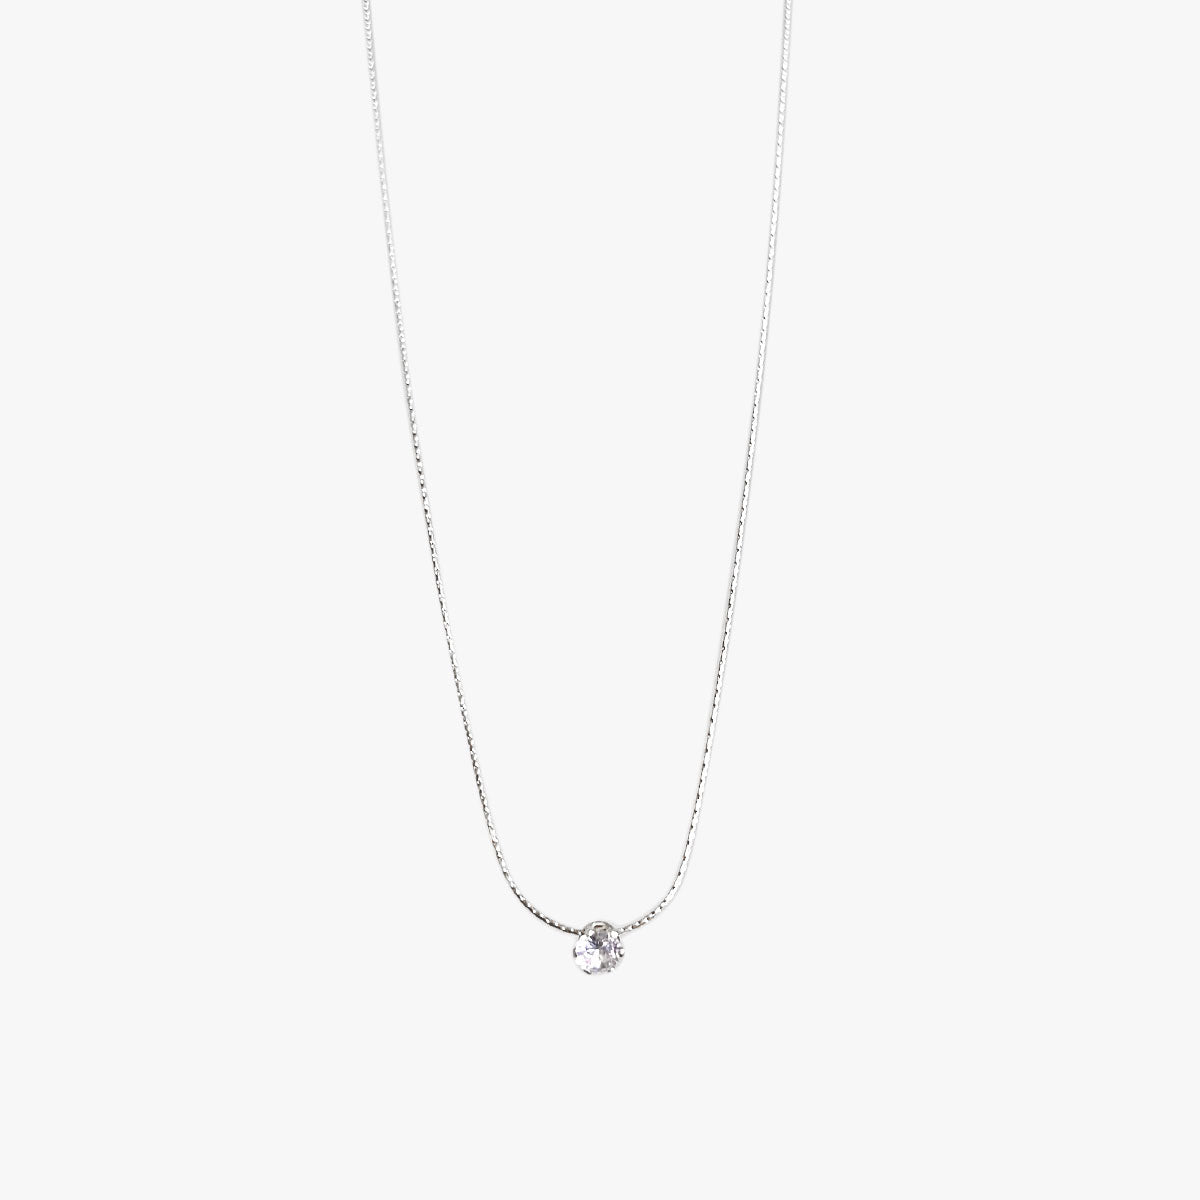 The Barely There Solitaire Necklace